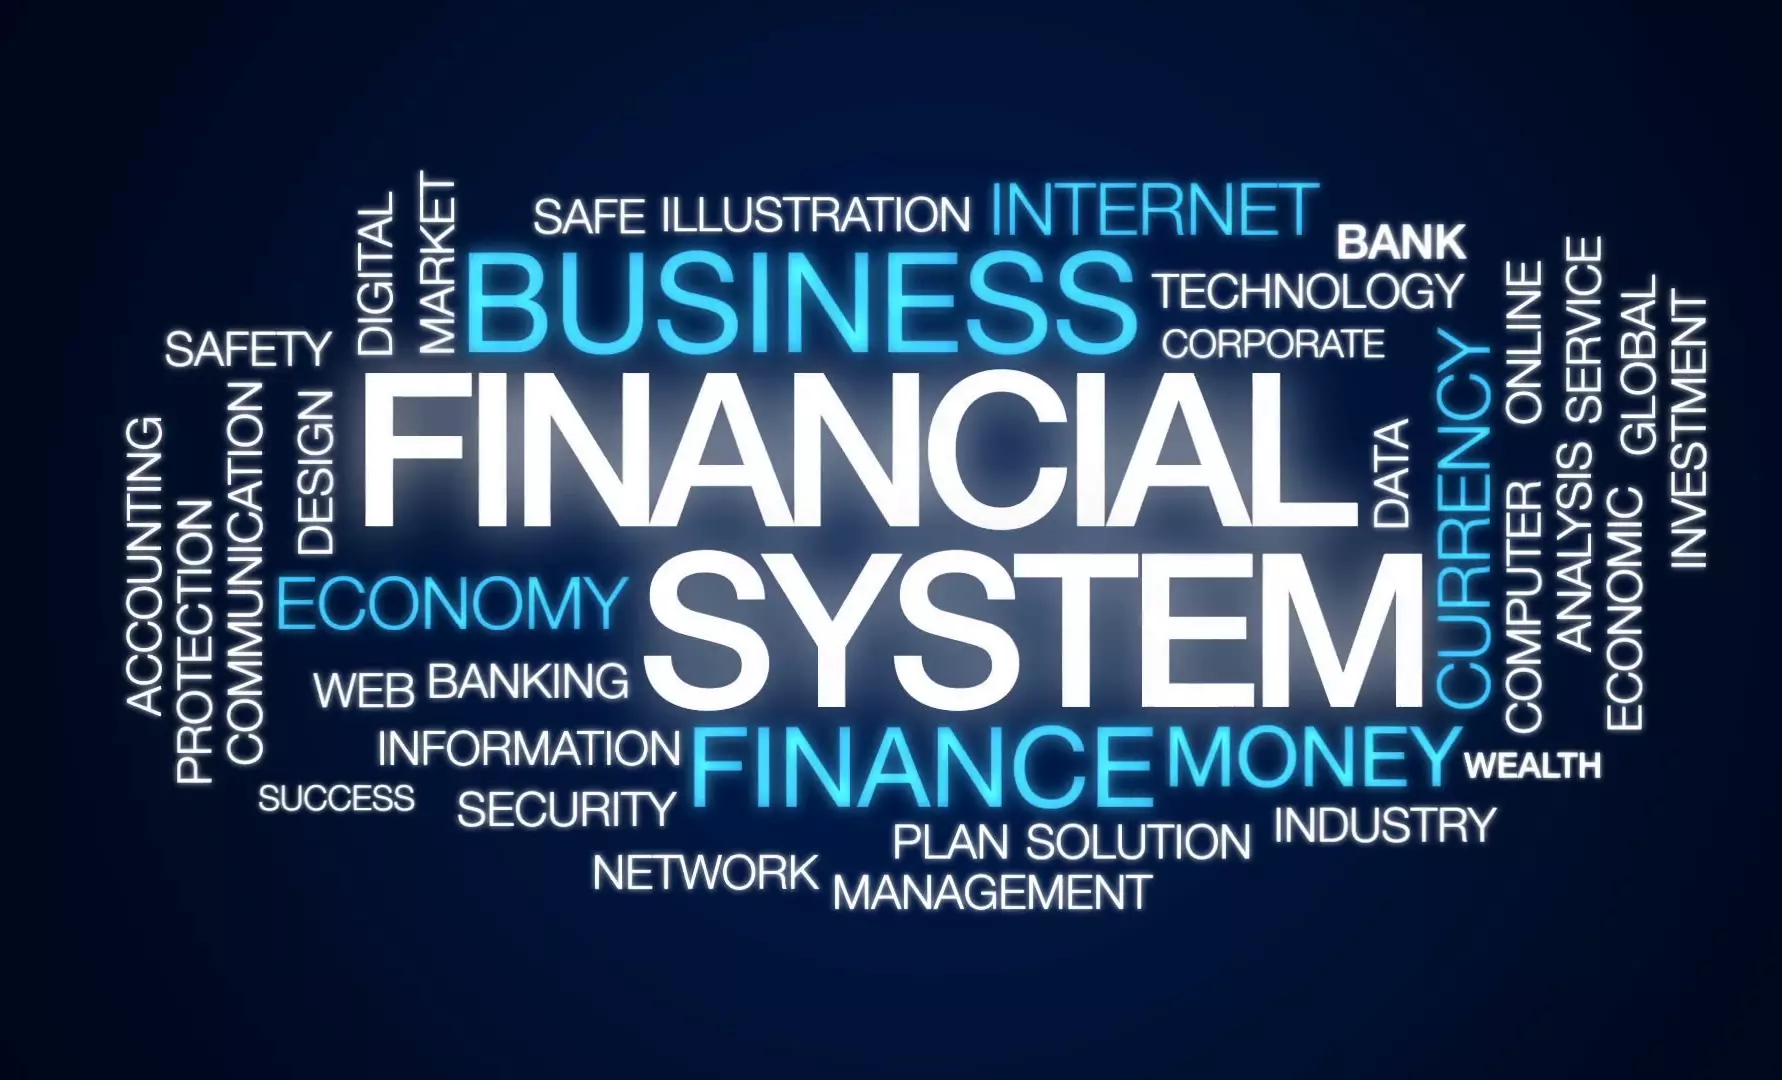 Advantages and disadvantages of the financial system